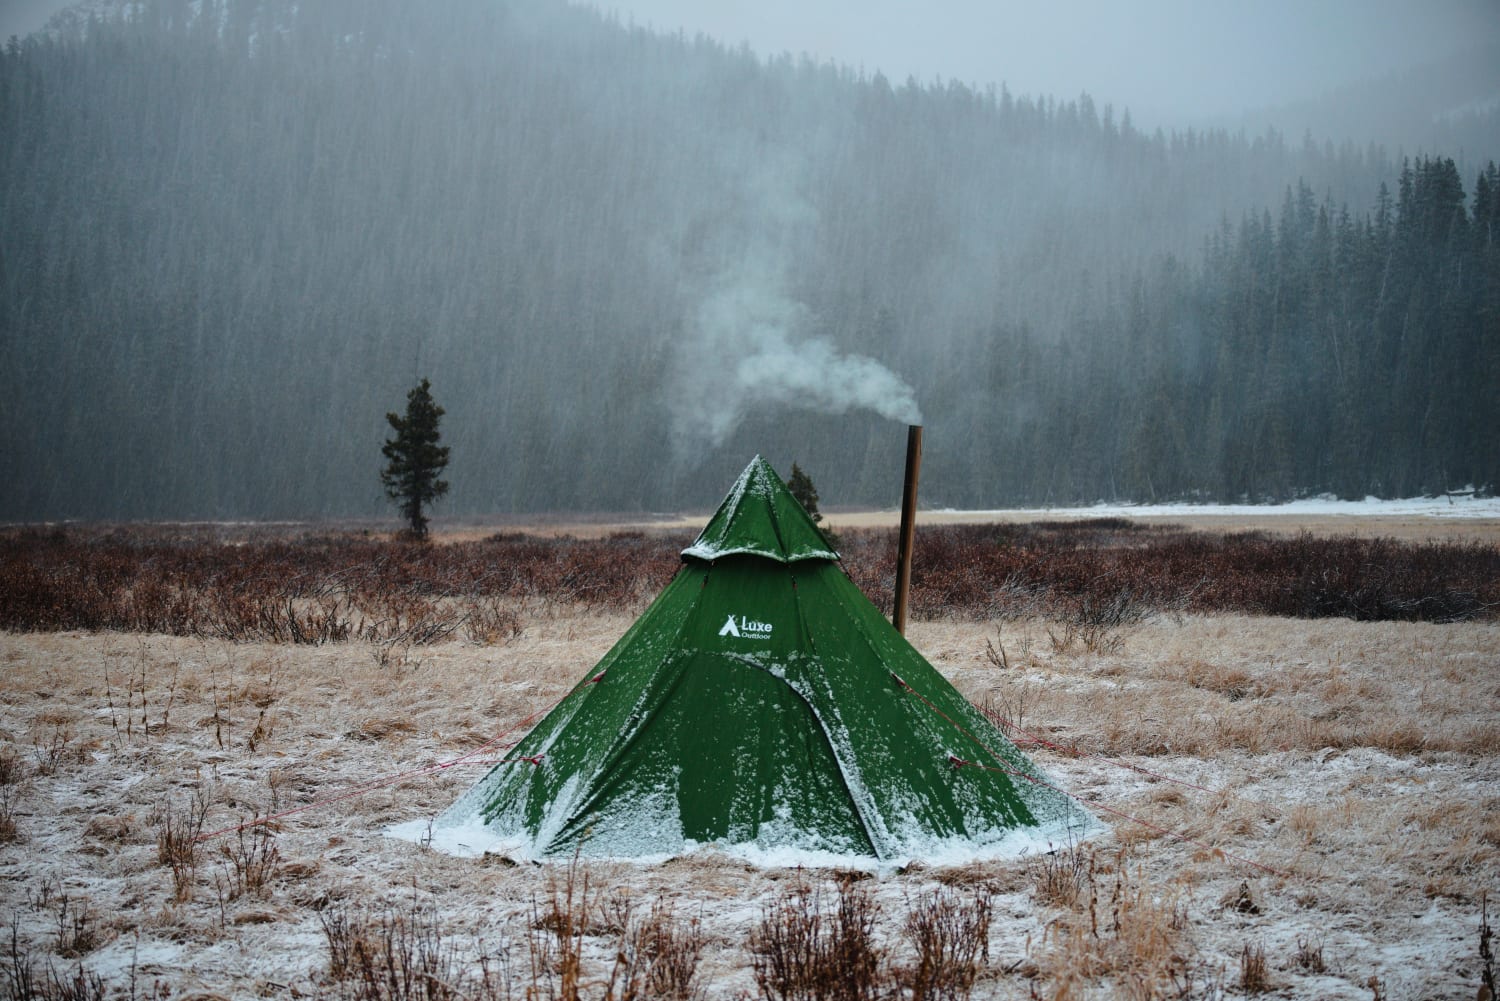 Who Doesn’t Love a Little Tipi Action? Taken Exactly One Year Ago Today, Hunter-Fryingpan Wilderness, Colorado